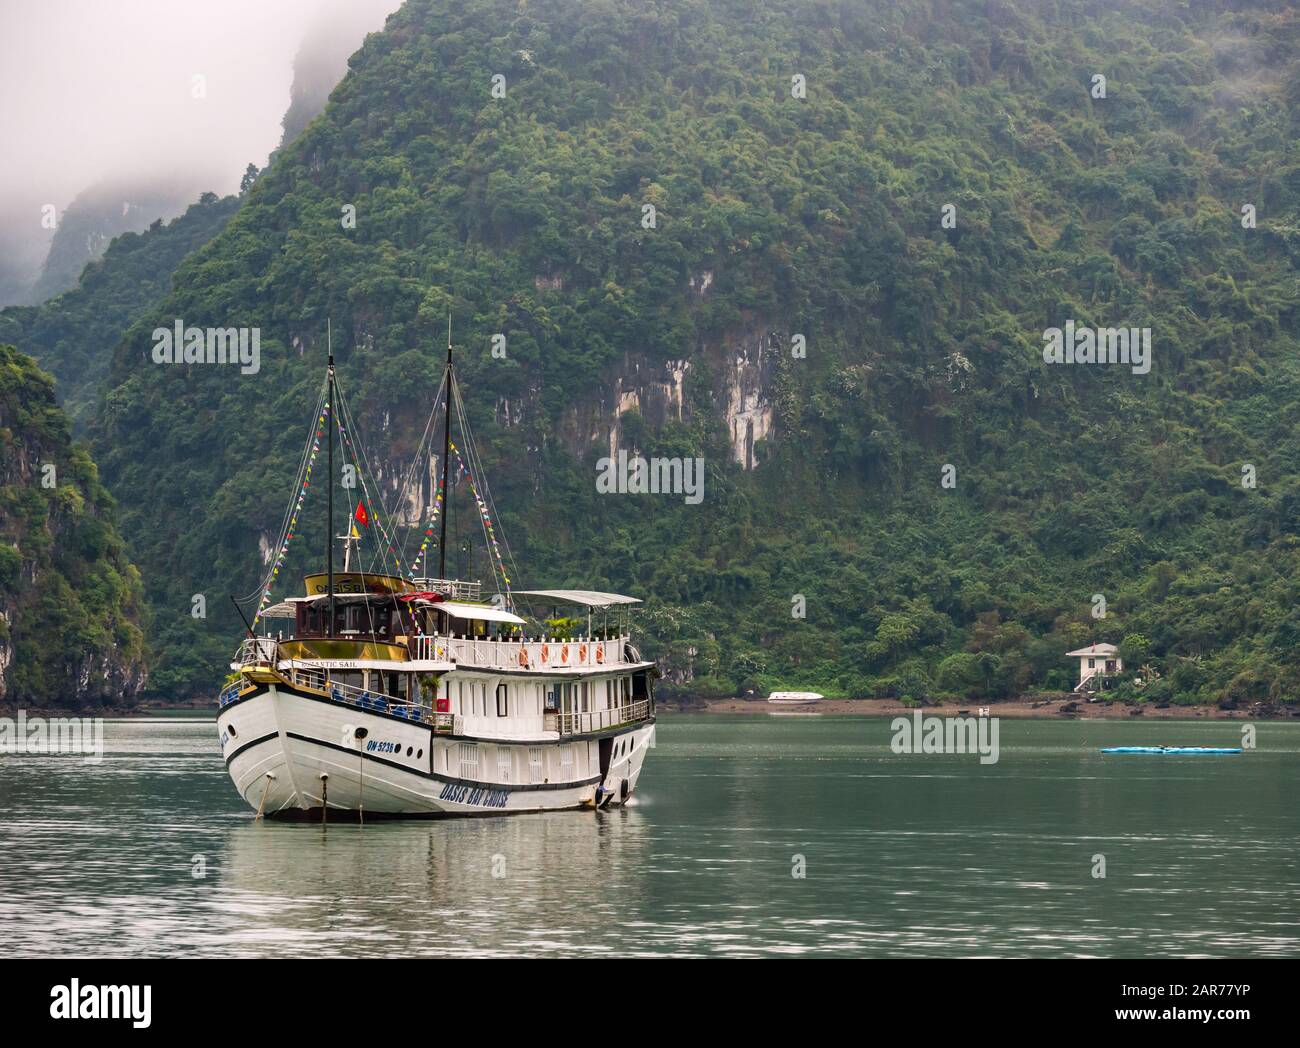 Tourist cruise ship in misty weather with limestone rock karst cliffs, Halong Bay, Vietnam, Asia Stock Photo